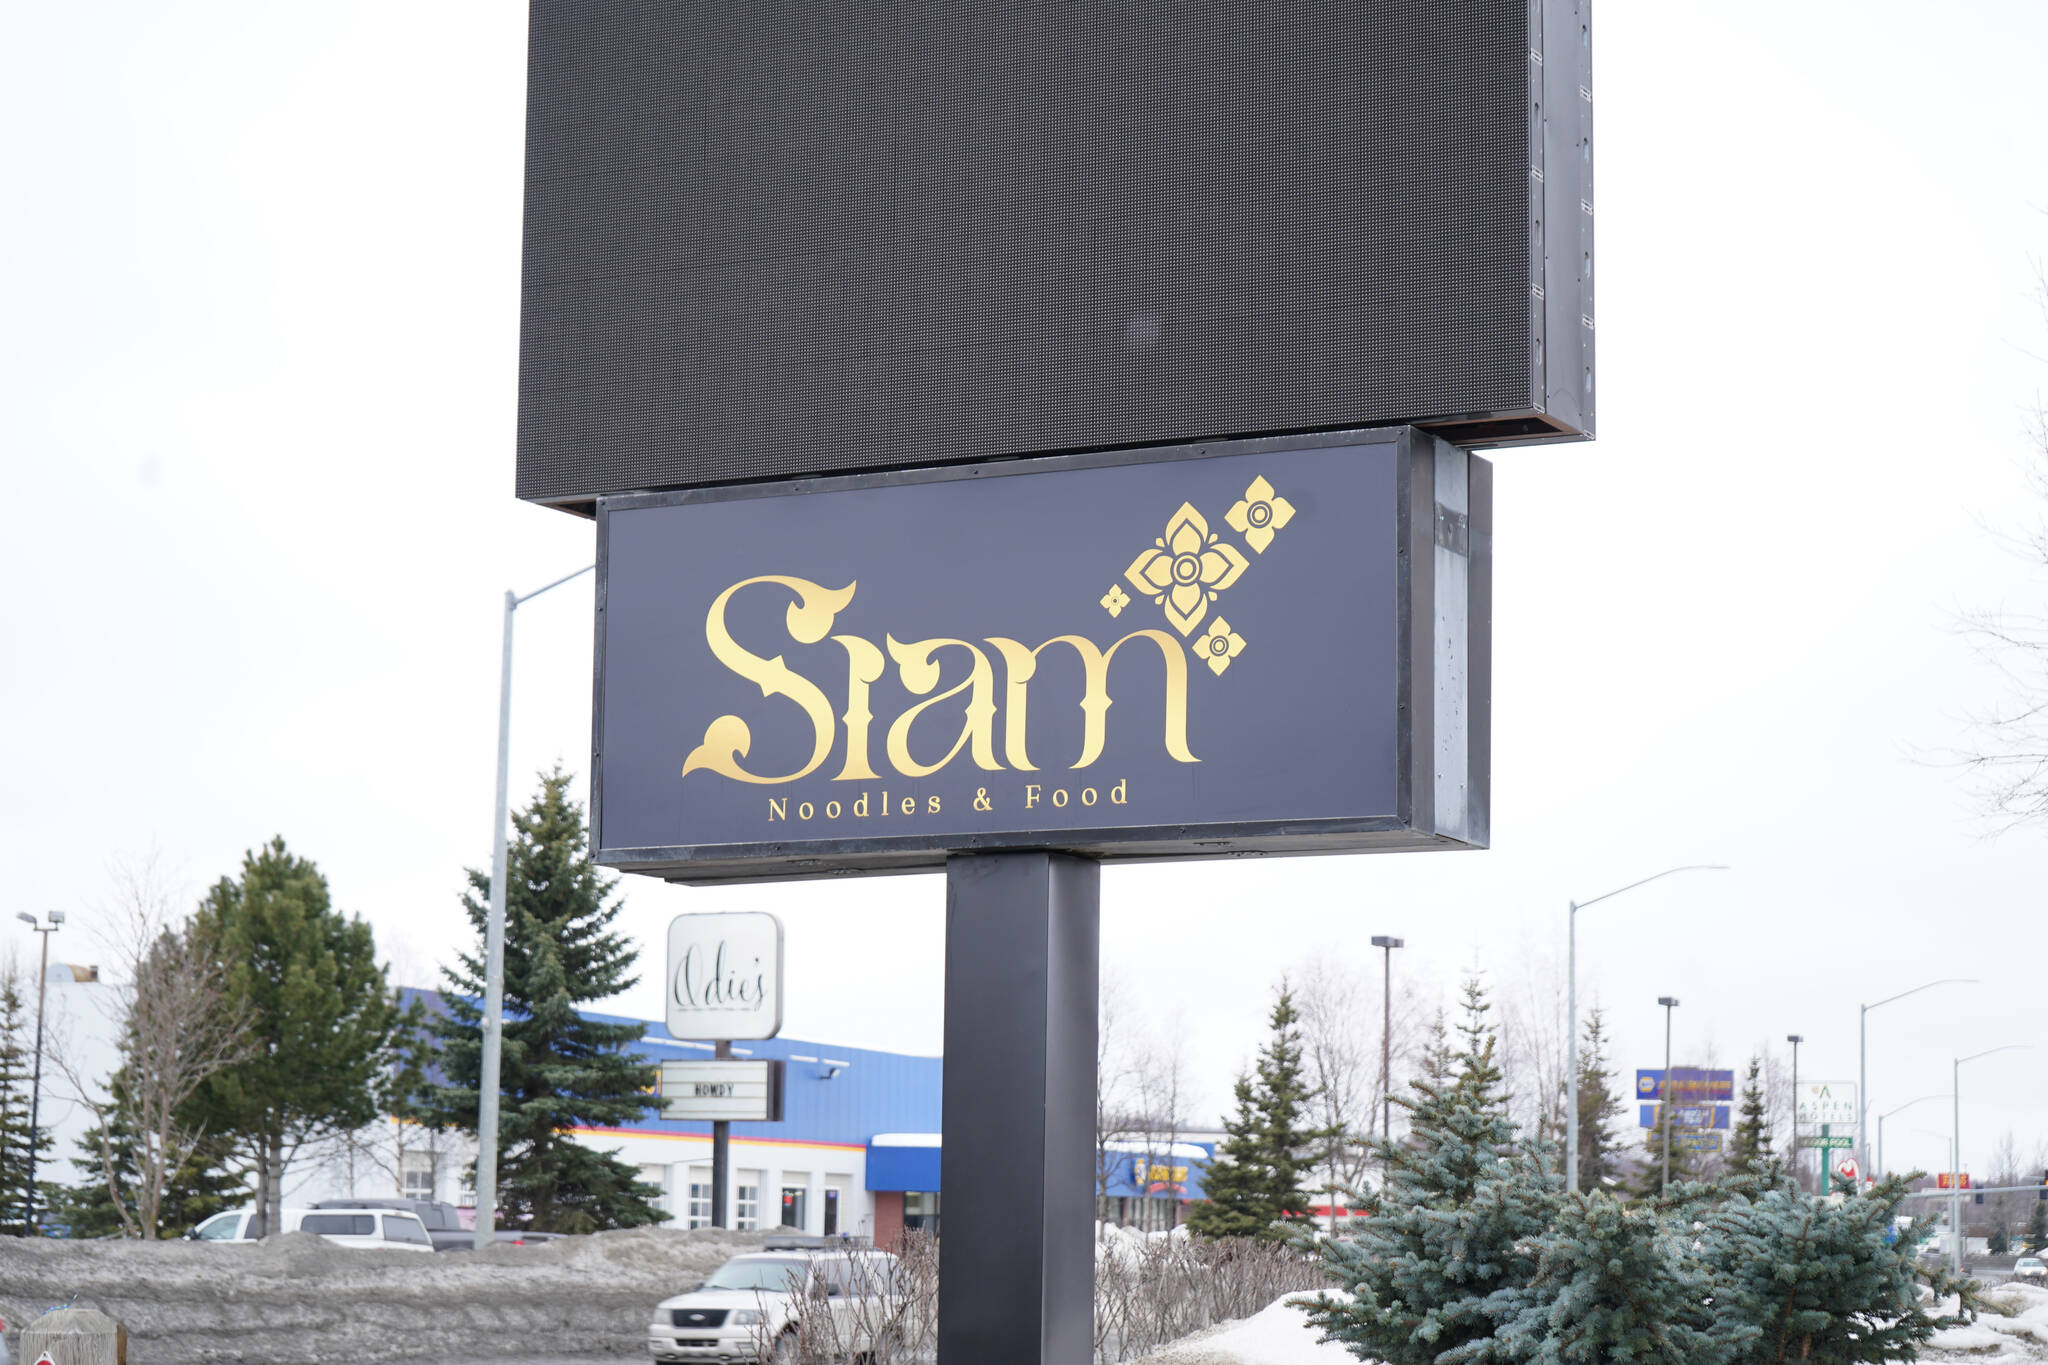 A sign for Siam Noodles and Food faces the Sterling Highway in Soldotna, Alaska, on Tuesday, March 28, 2023. (Jake Dye/Peninsula Clarion)